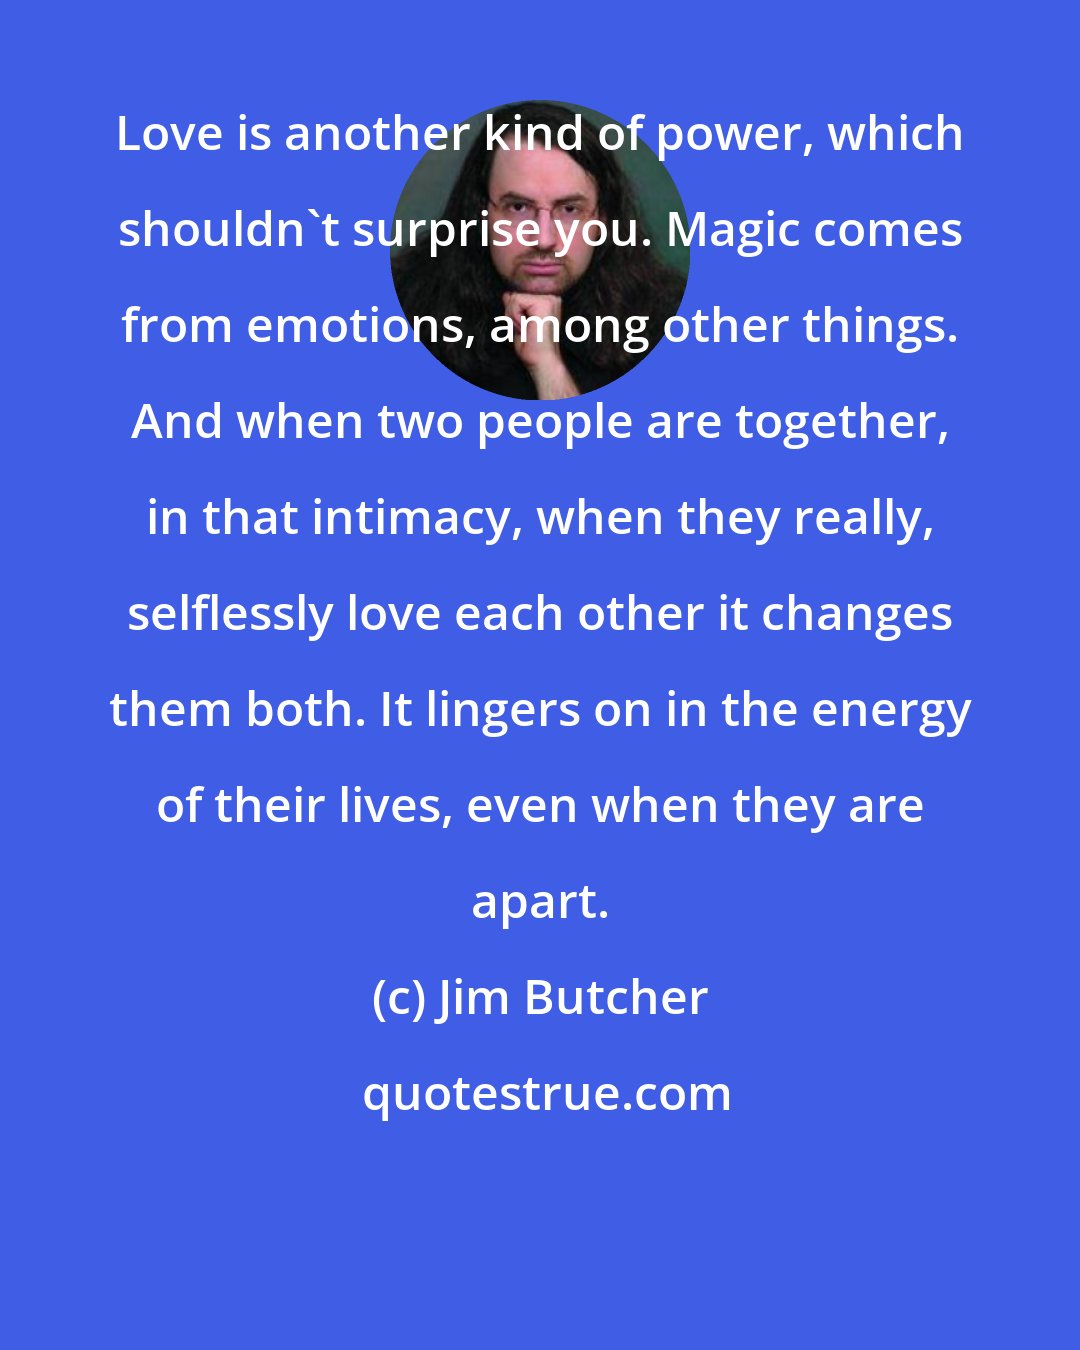 Jim Butcher: Love is another kind of power, which shouldn't surprise you. Magic comes from emotions, among other things. And when two people are together, in that intimacy, when they really, selflessly love each other it changes them both. It lingers on in the energy of their lives, even when they are apart.